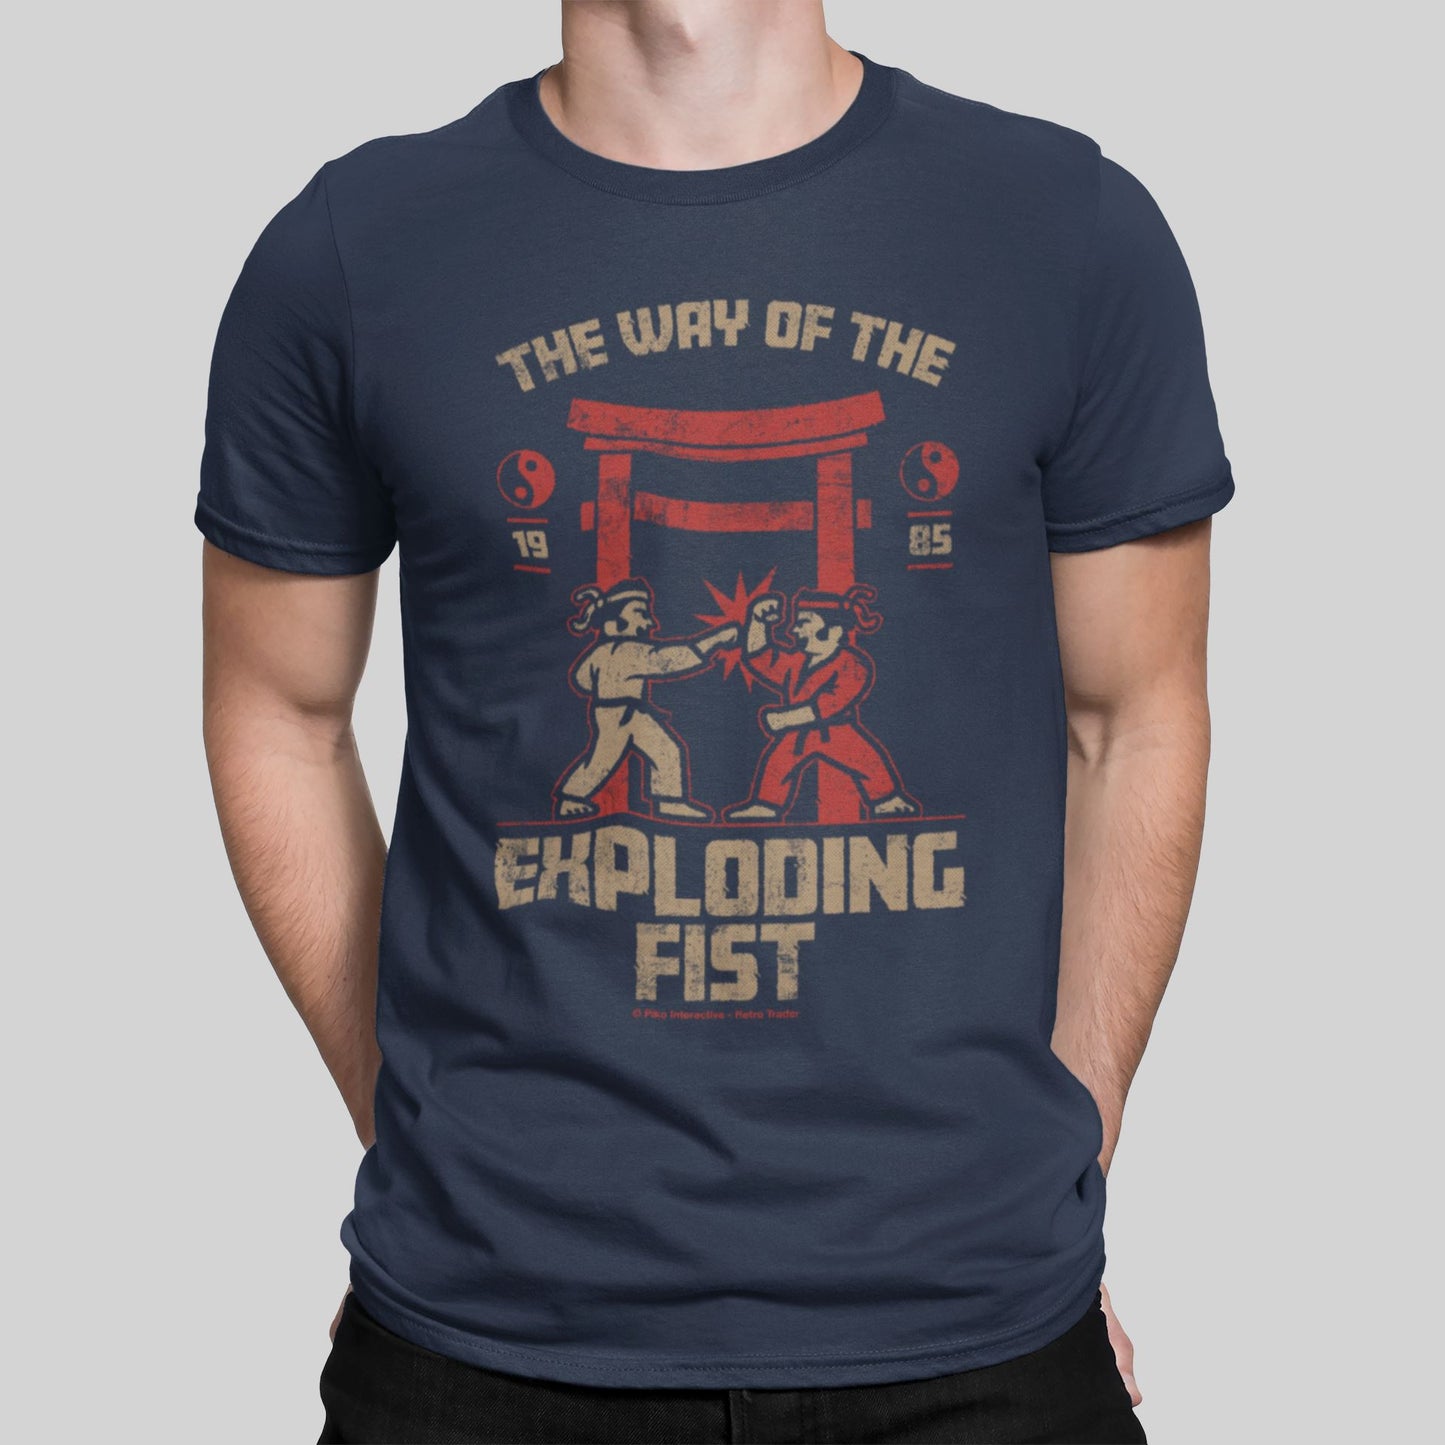 Way Of The Exploding Fist Retro Gaming T-Shirt T-Shirt Seven Squared Small 34-36" Navy 